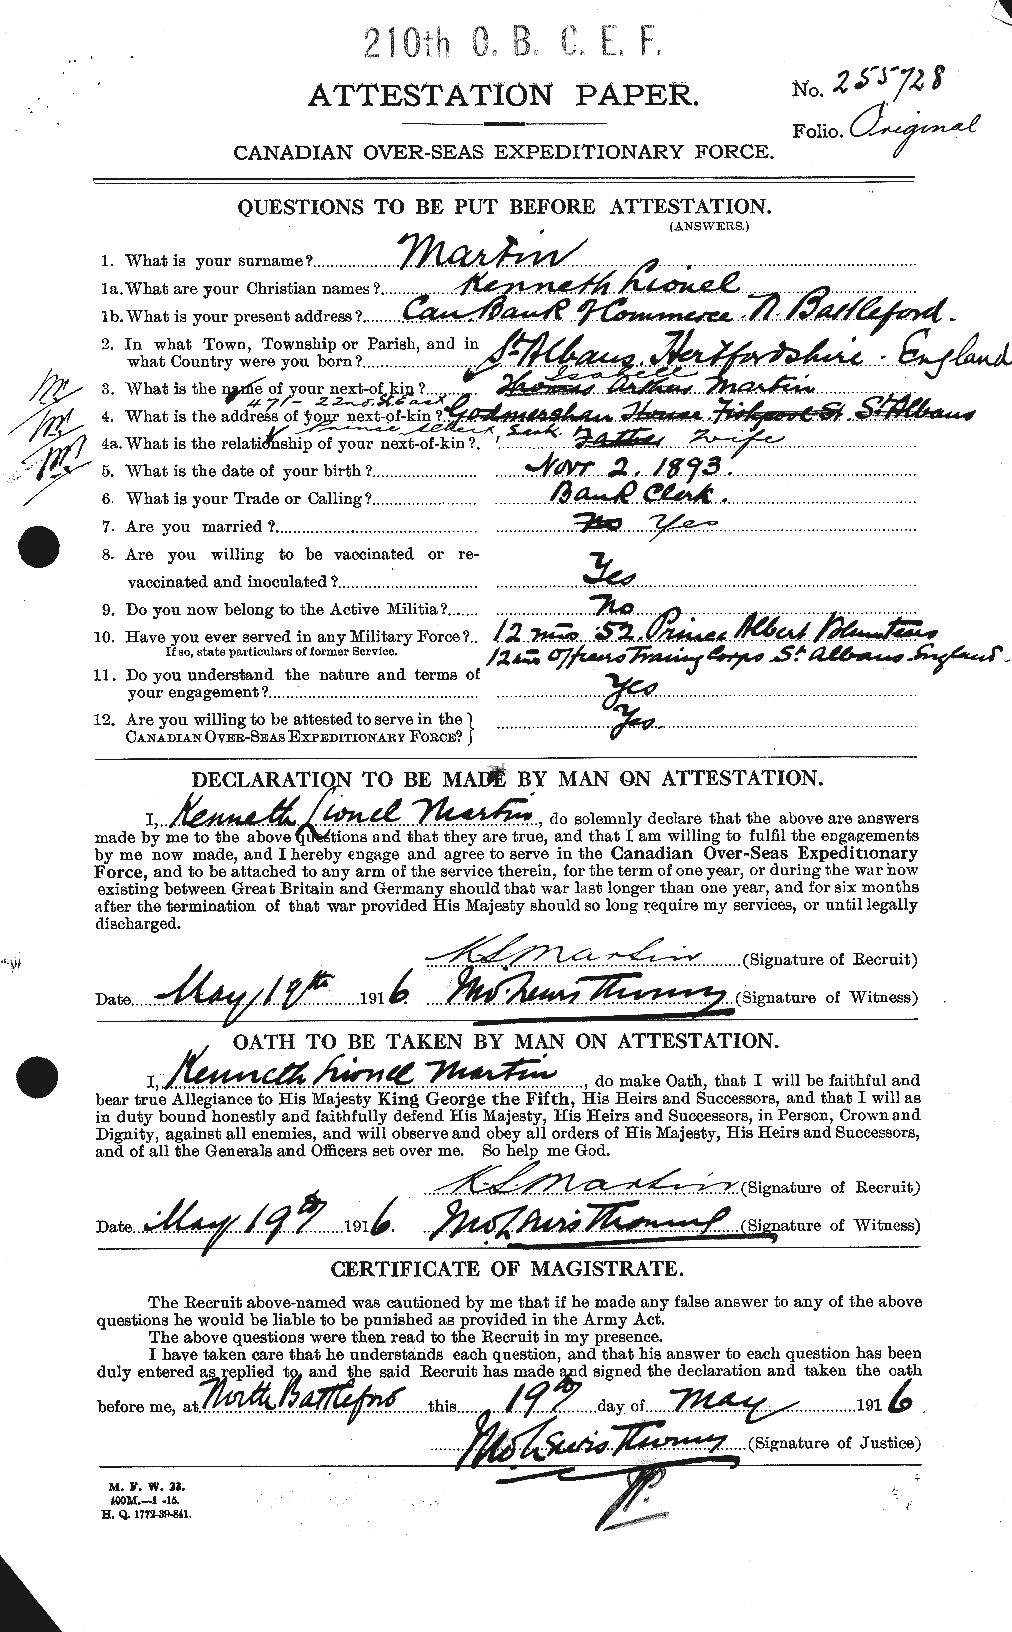 Personnel Records of the First World War - CEF 481094a